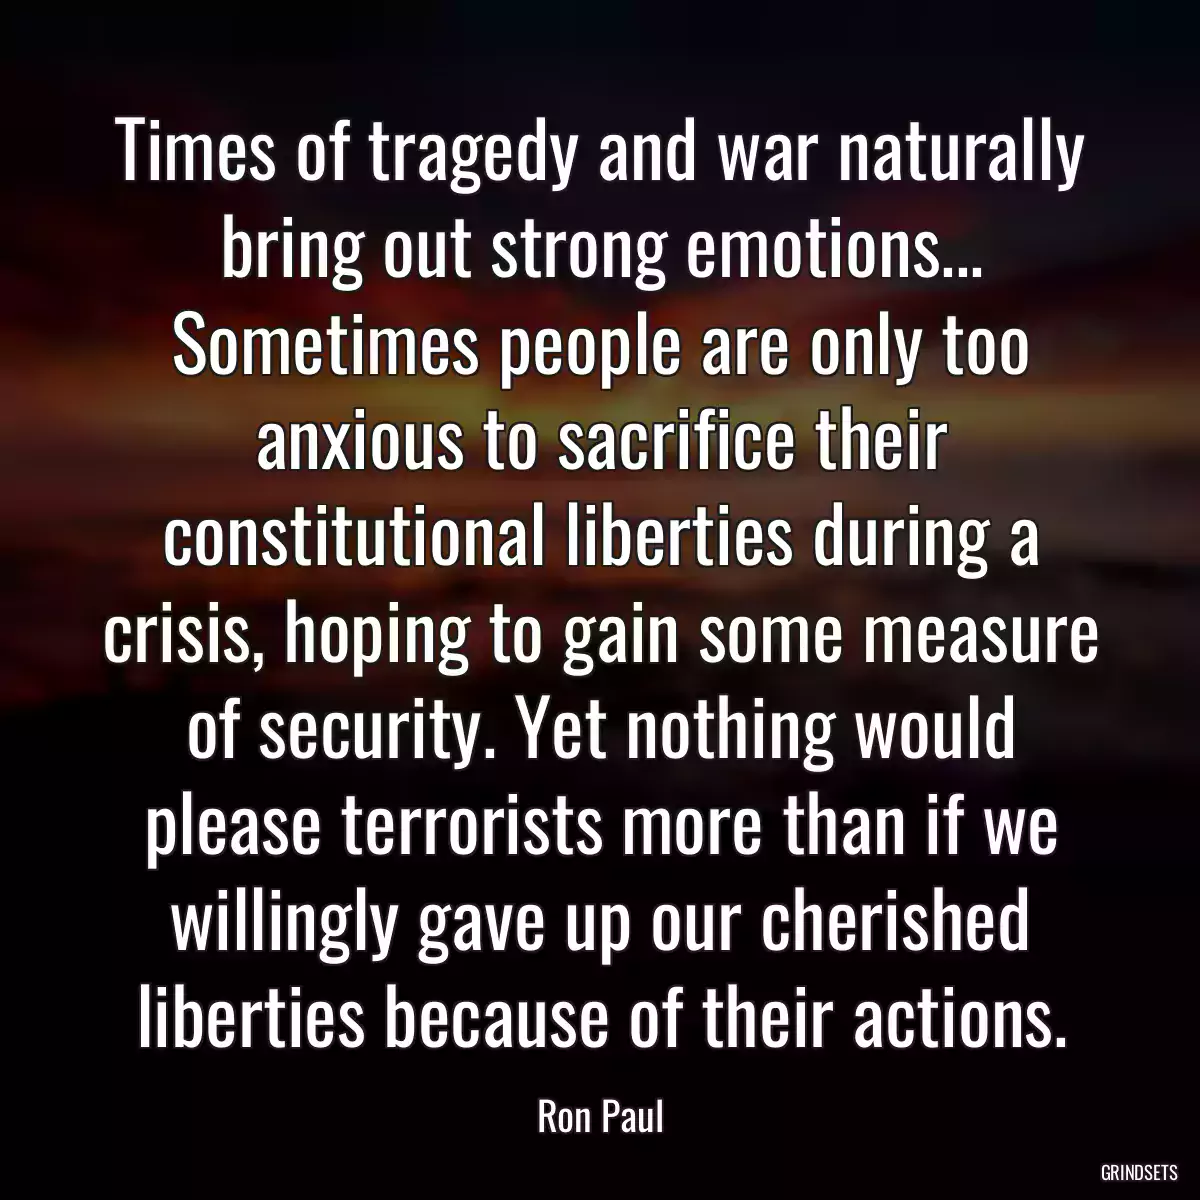 Times of tragedy and war naturally bring out strong emotions... Sometimes people are only too anxious to sacrifice their constitutional liberties during a crisis, hoping to gain some measure of security. Yet nothing would please terrorists more than if we willingly gave up our cherished liberties because of their actions.